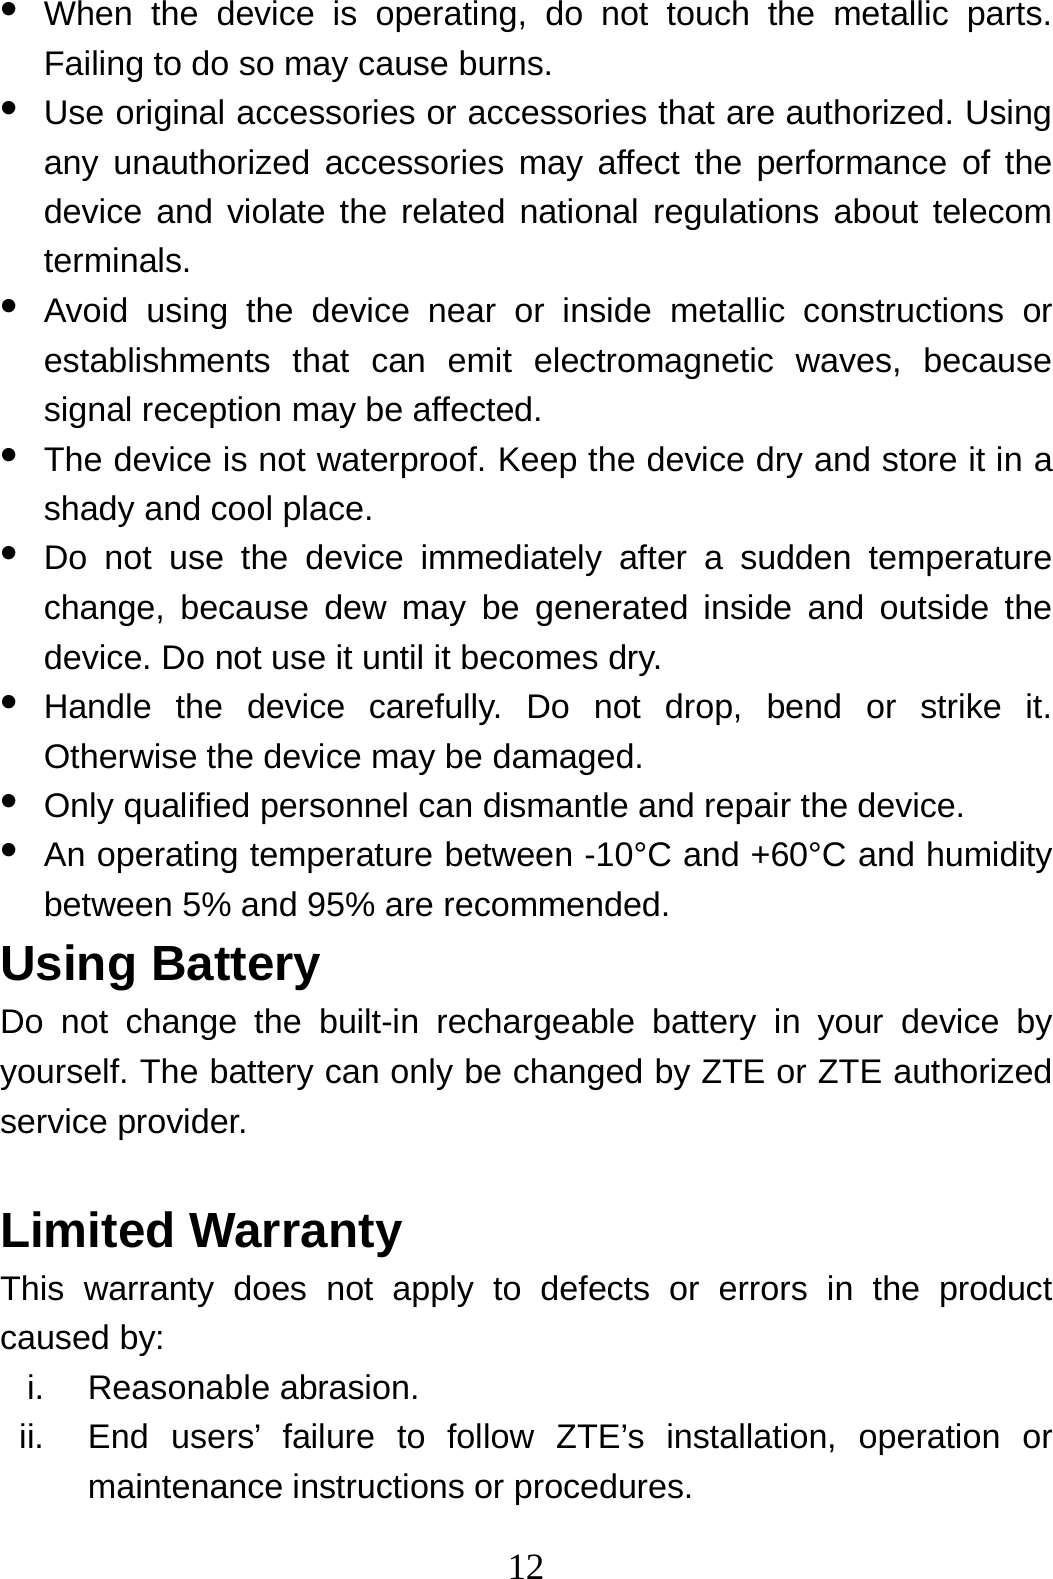 12  •  When the device is operating, do not touch the metallic parts. Failing to do so may cause burns. •  Use original accessories or accessories that are authorized. Using any unauthorized accessories may affect the performance of the device and violate the related national regulations about telecom terminals. •  Avoid using the device near or inside metallic constructions or establishments that can emit electromagnetic waves, because signal reception may be affected. •  The device is not waterproof. Keep the device dry and store it in a shady and cool place. •  Do not use the device immediately after a sudden temperature change, because dew may be generated inside and outside the device. Do not use it until it becomes dry. •  Handle the device carefully. Do not drop, bend or strike it. Otherwise the device may be damaged. •  Only qualified personnel can dismantle and repair the device. •  An operating temperature between -10°C and +60°C and humidity between 5% and 95% are recommended. Using Battery   Do not change the built-in rechargeable battery in your device by yourself. The battery can only be changed by ZTE or ZTE authorized service provider.  Limited Warranty This warranty does not apply to defects or errors in the product caused by: i. Reasonable abrasion. ii.  End users’ failure to follow ZTE’s installation, operation or maintenance instructions or procedures. 